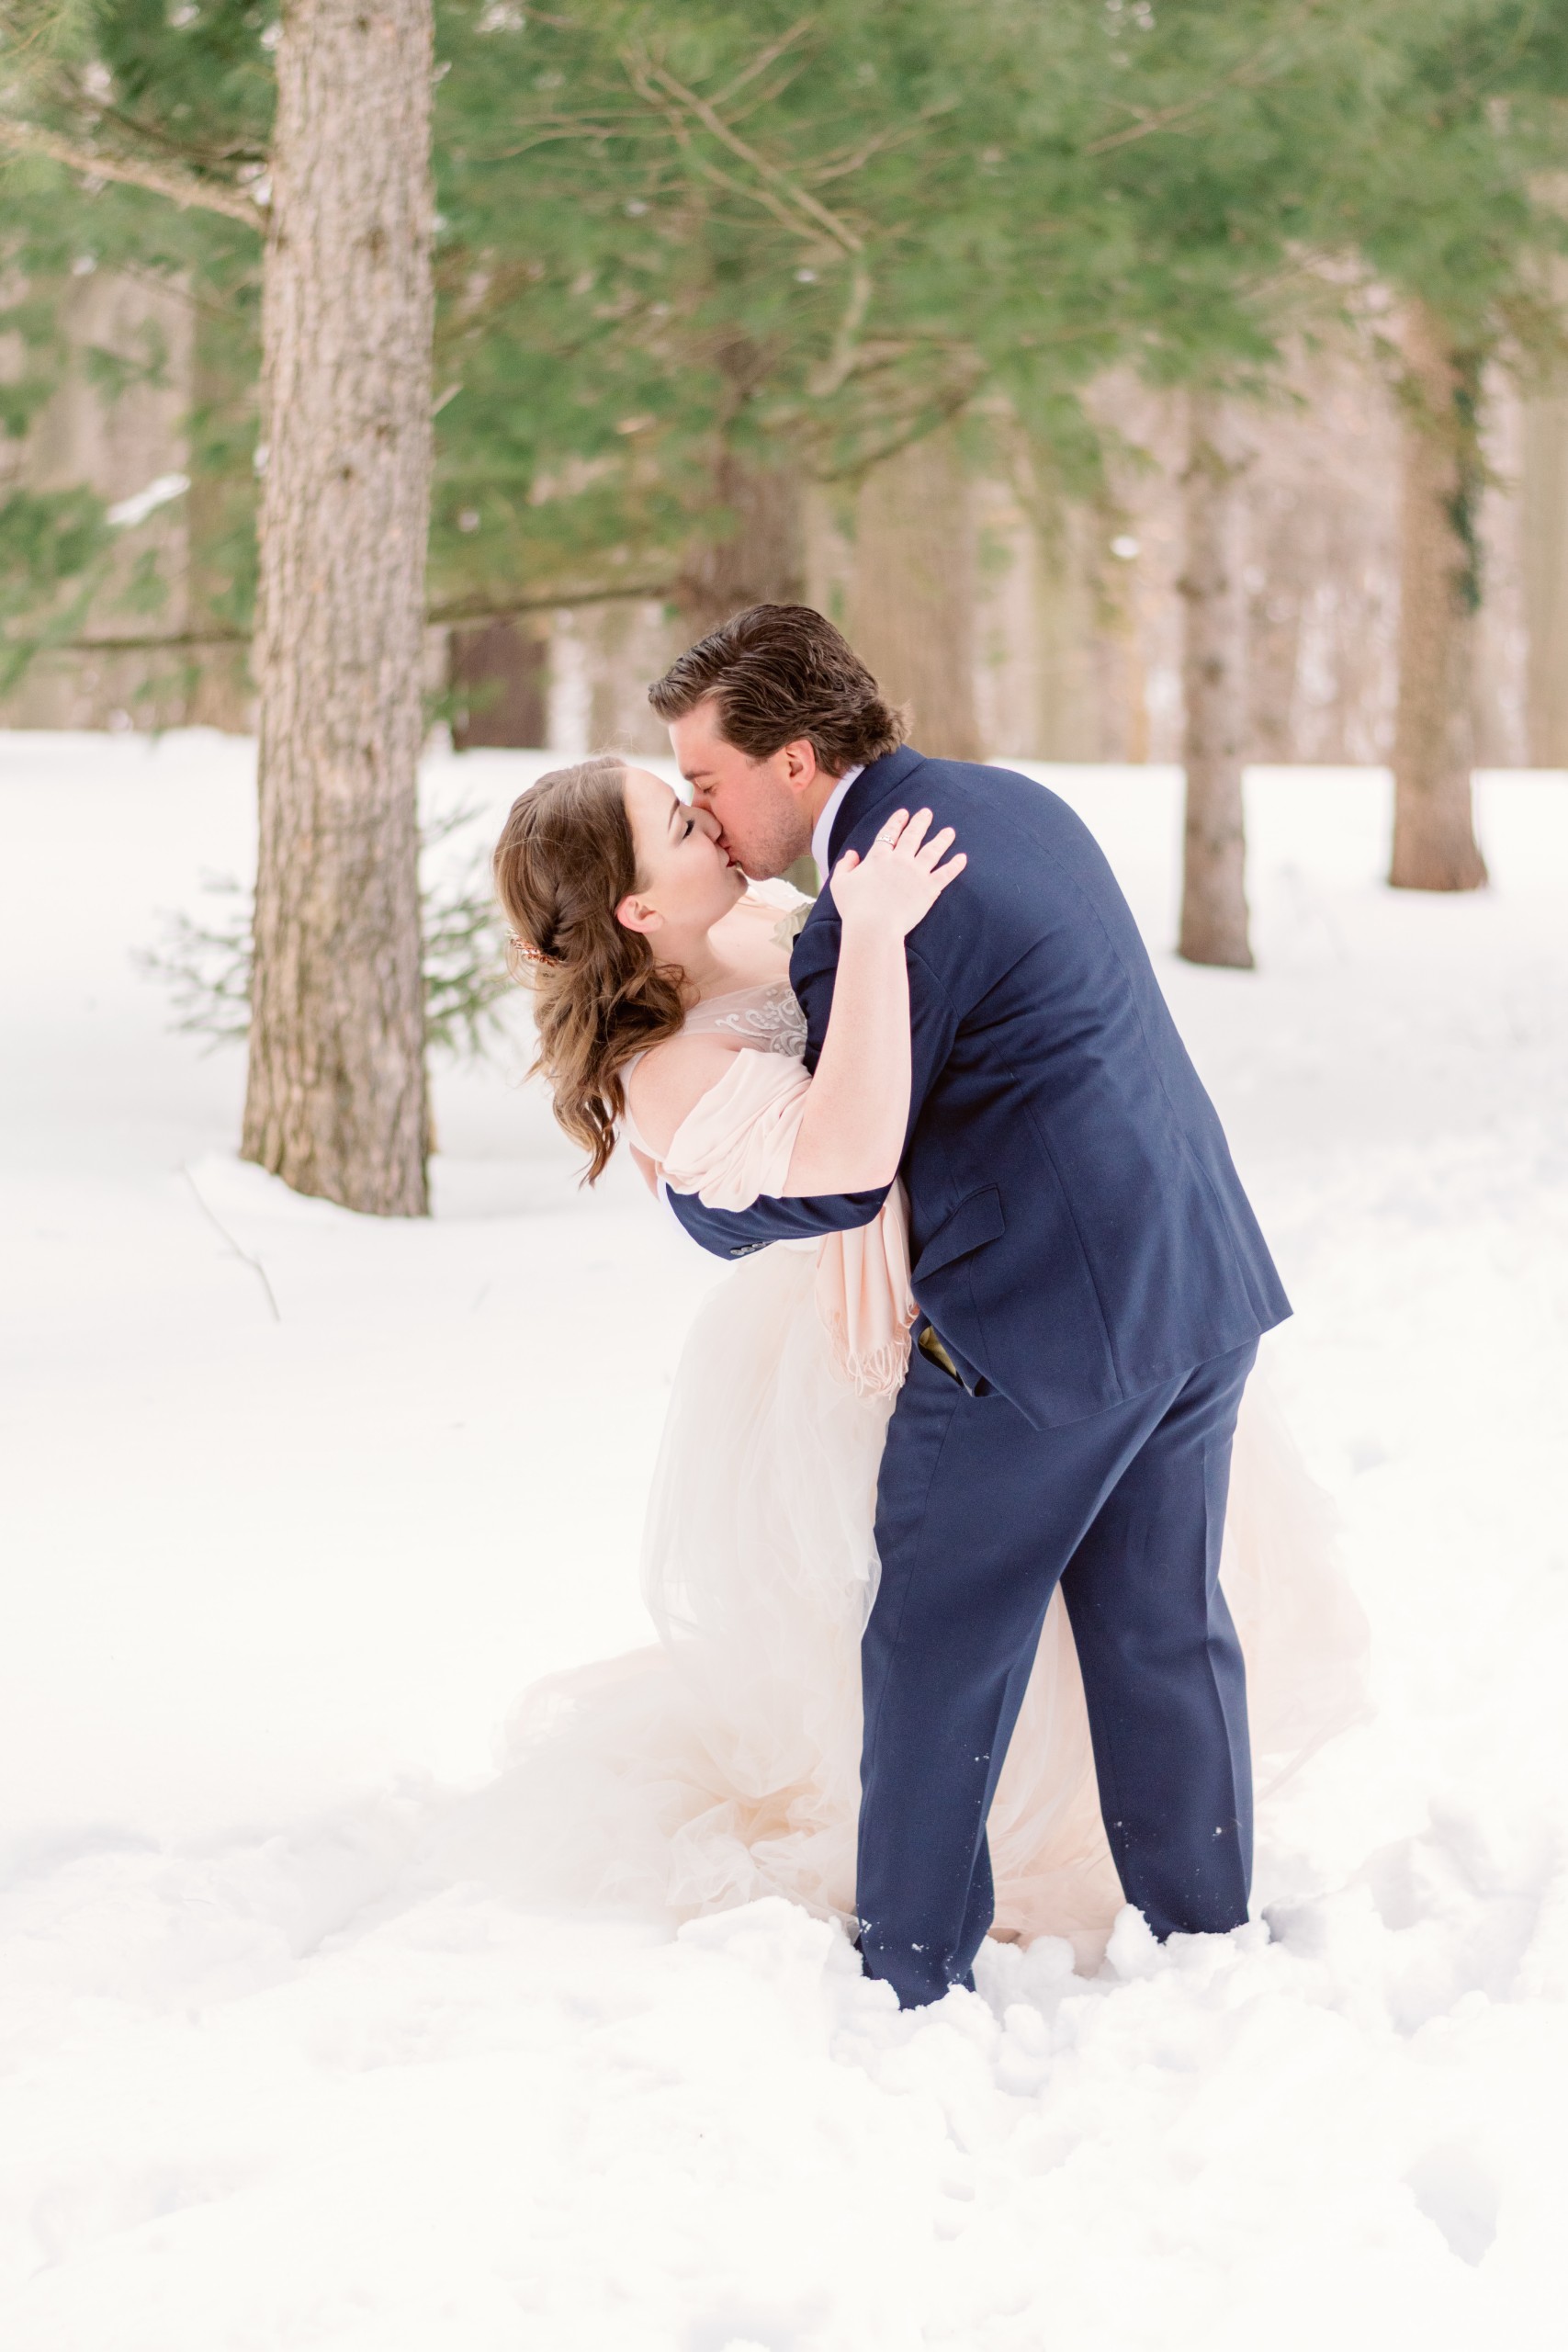 A couple kisses in snowy forest on their wedding day.